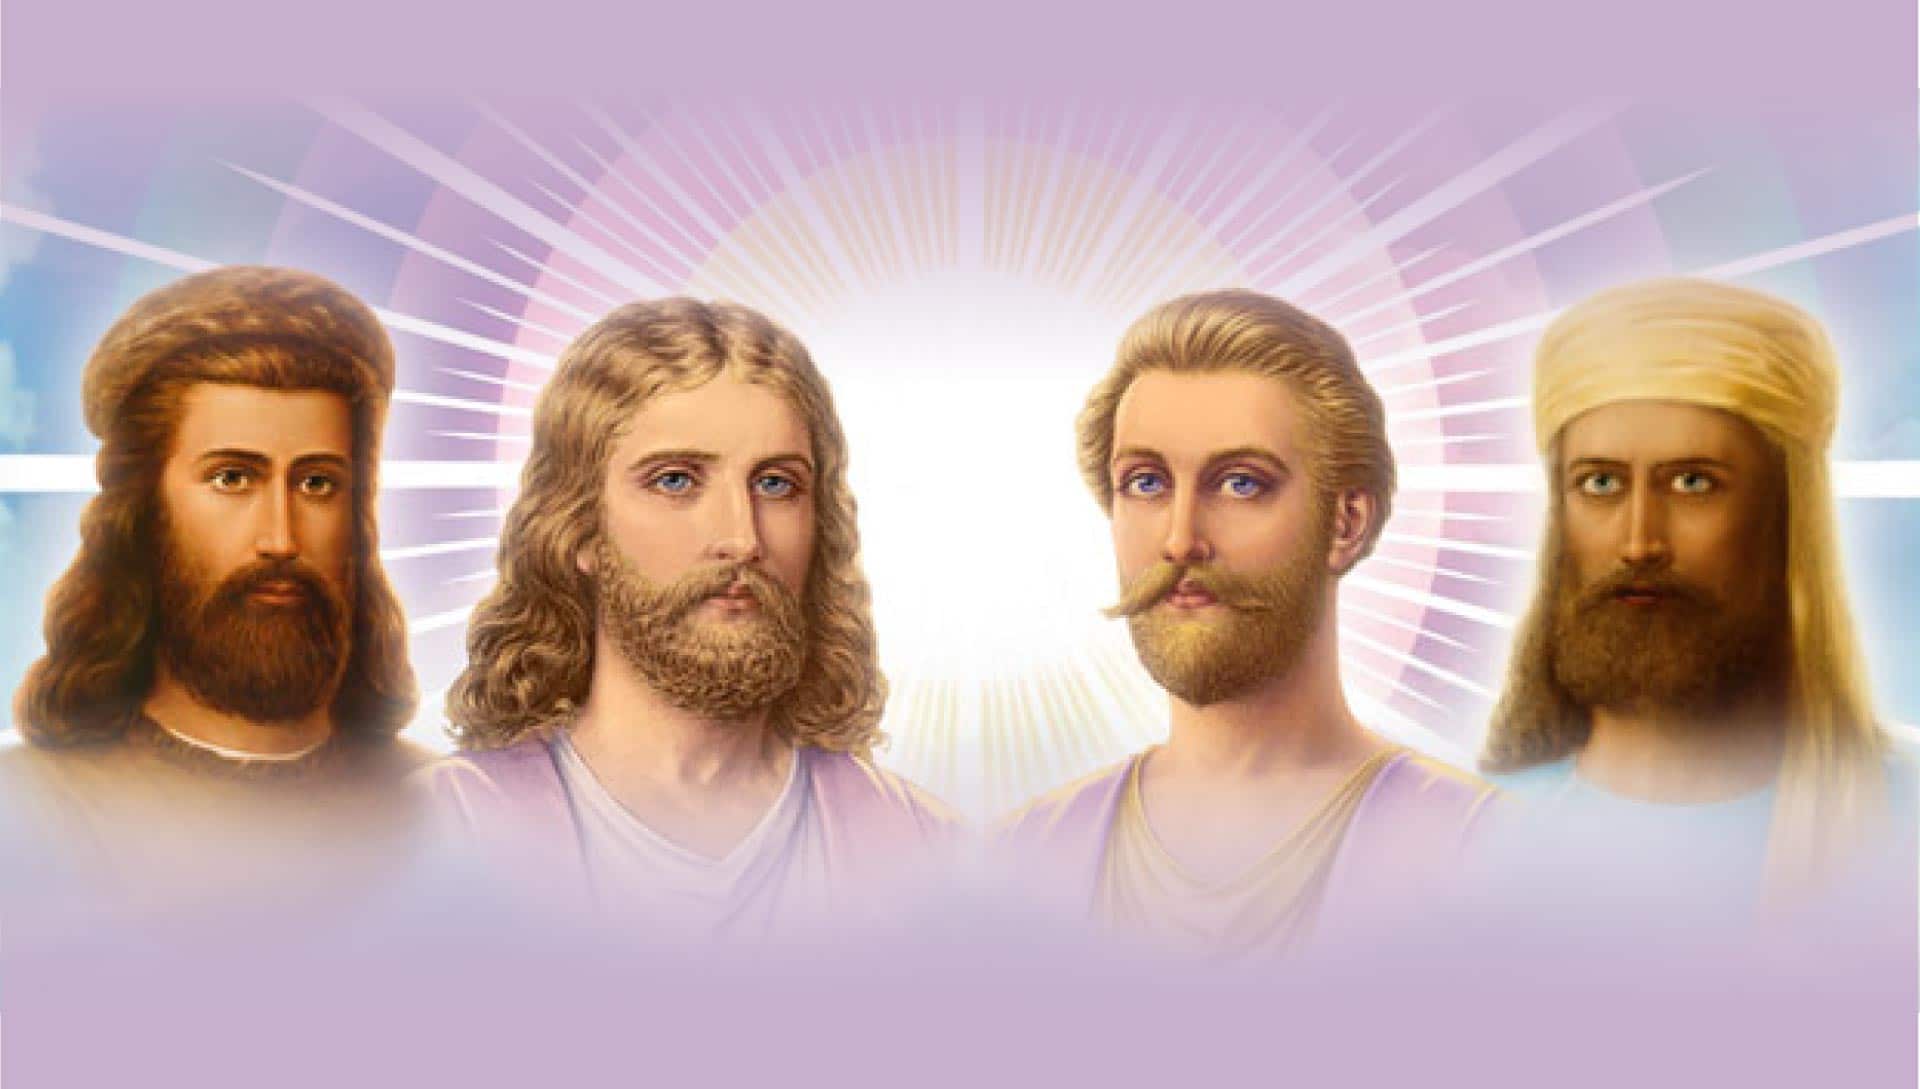 Ascended masters